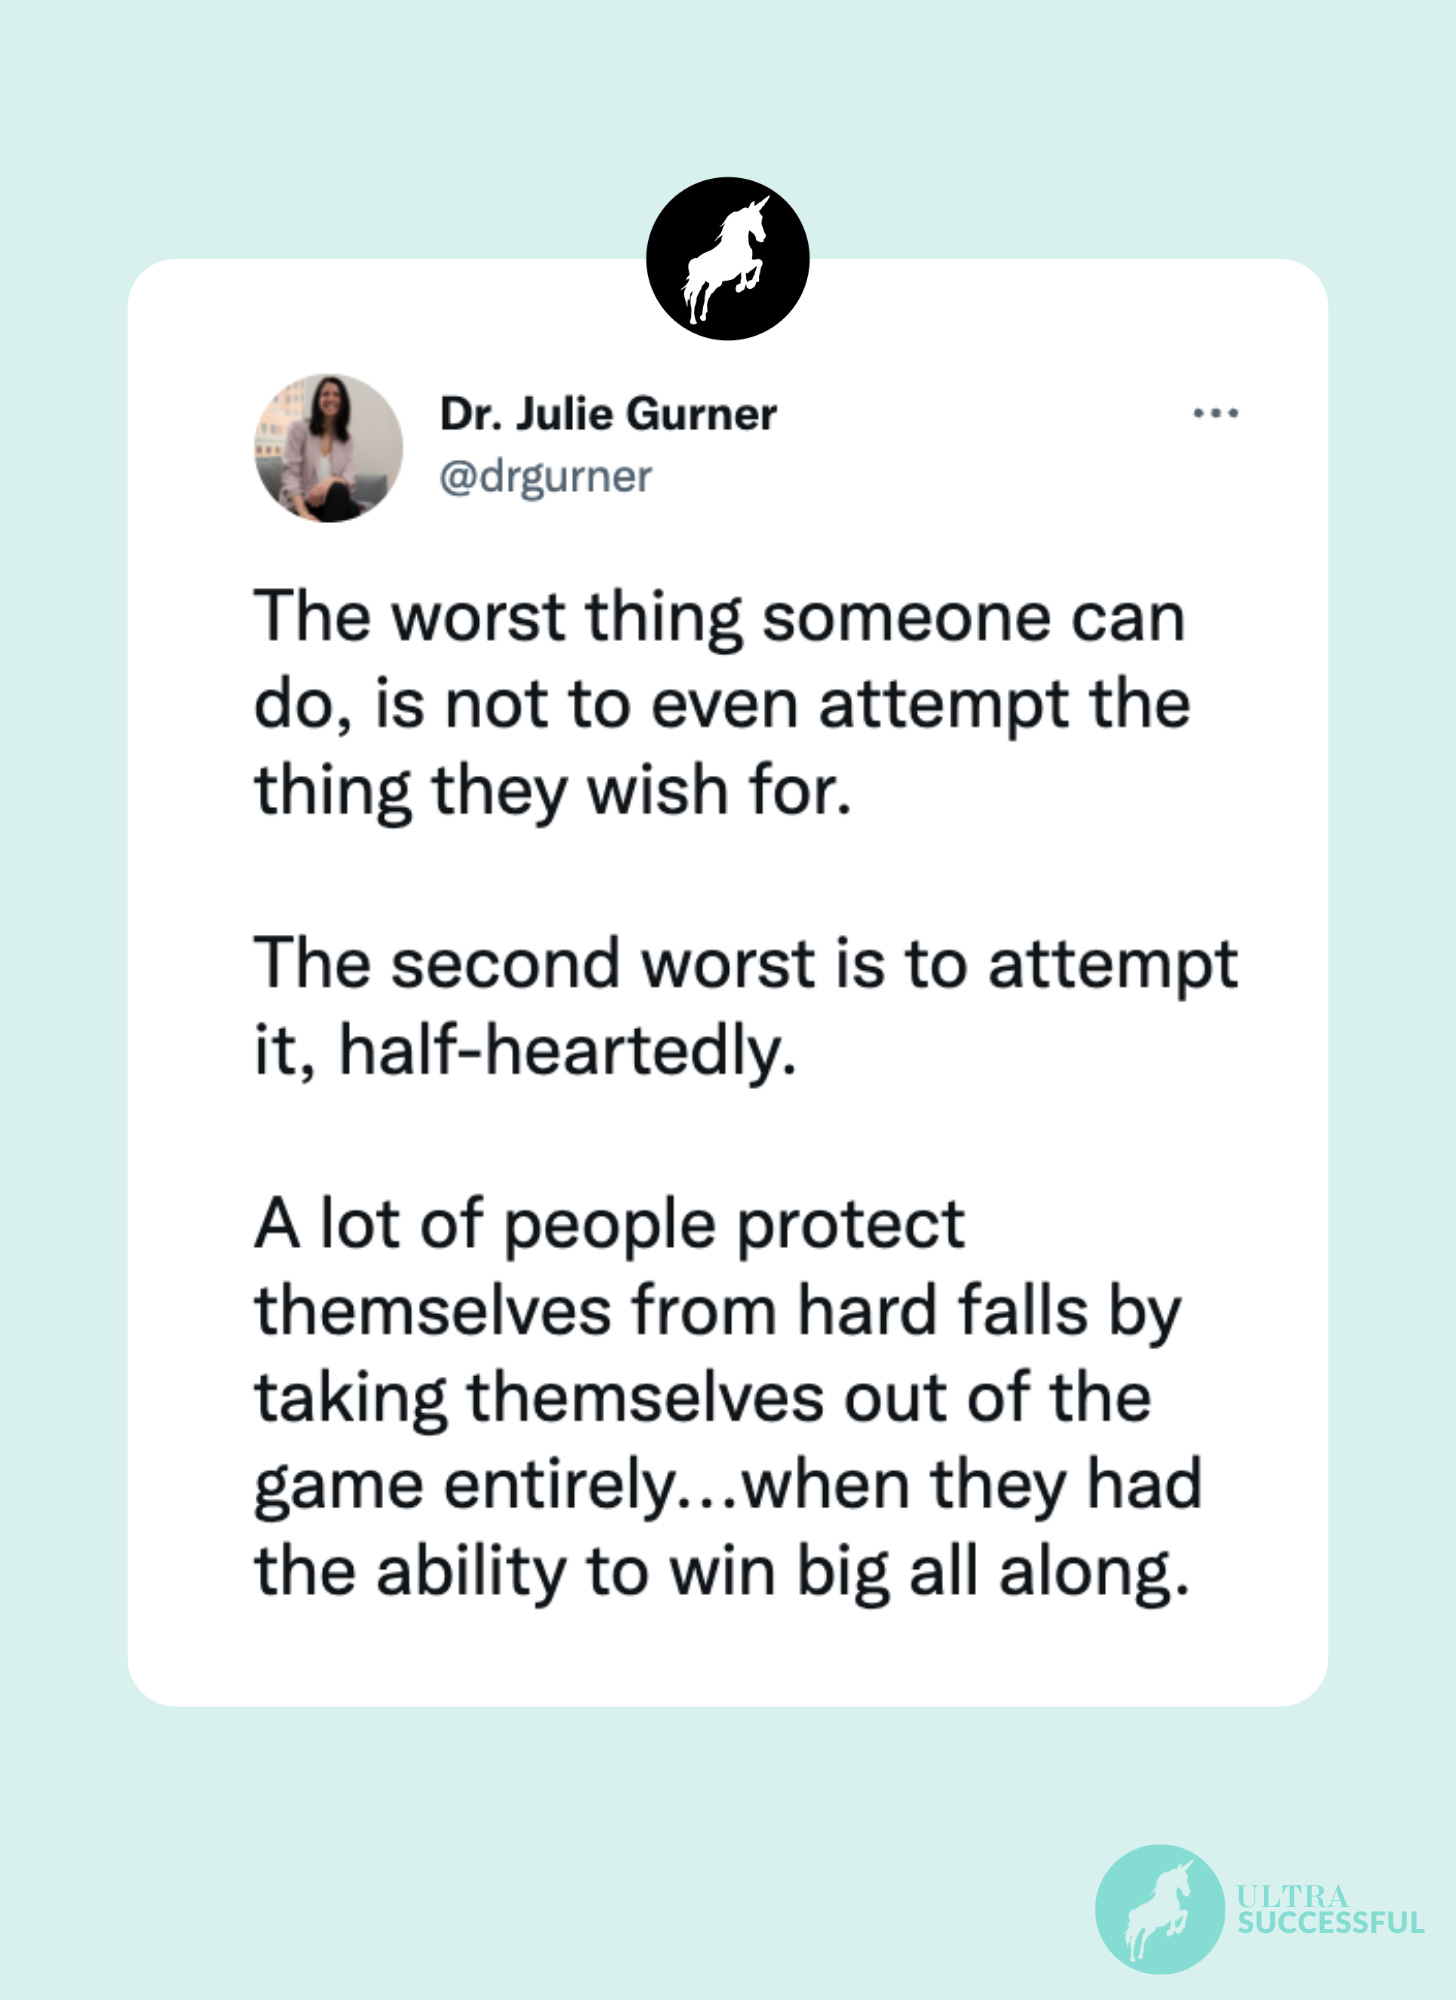 @drgurner: The worst thing someone can do, is not to even attempt the thing they wish for.   The second worst is to attempt it, half-heartedly.  A lot of people protect themselves from hard falls by taking themselves out of the game entirely...when they had the ability to win big all along.